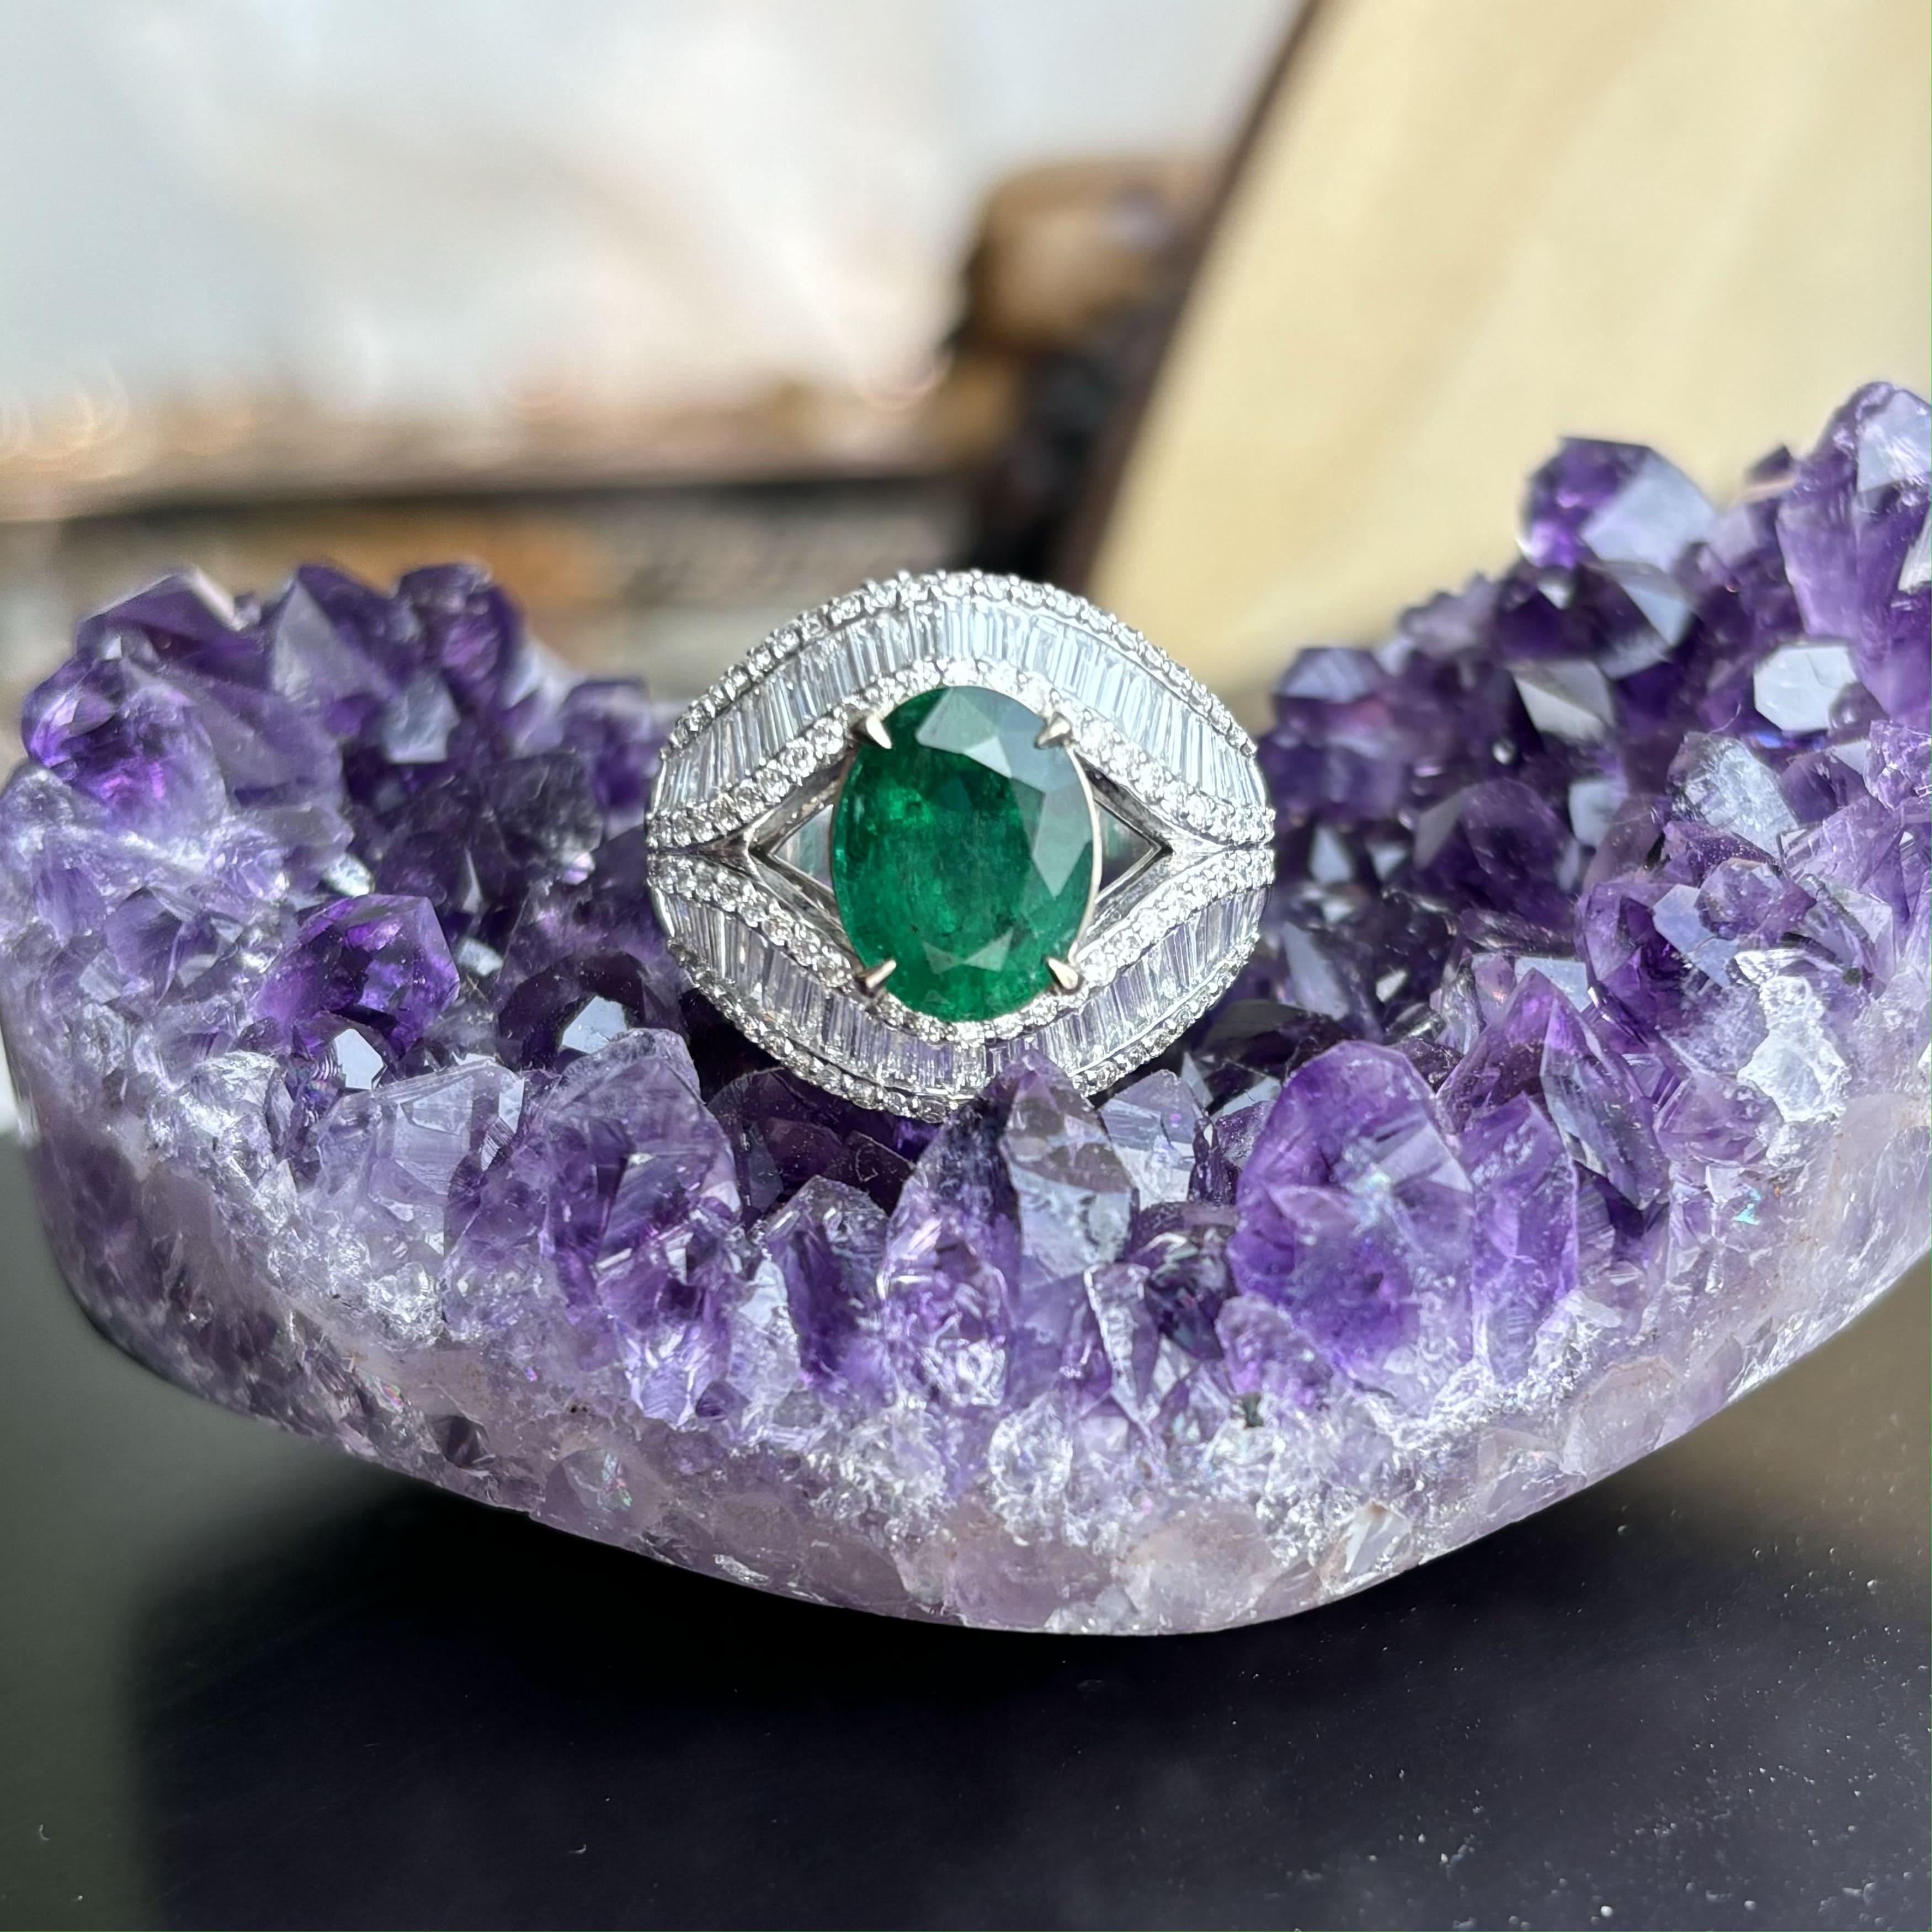 Presenting a masterpiece of a ring that perfectly combines the vivid green elegance of a meticulously cut Emerald with the brilliance of sparkling baguette Diamonds.

Originating from the enchanting mines of Zambia, the 2.56 Carat Emerald boasts a